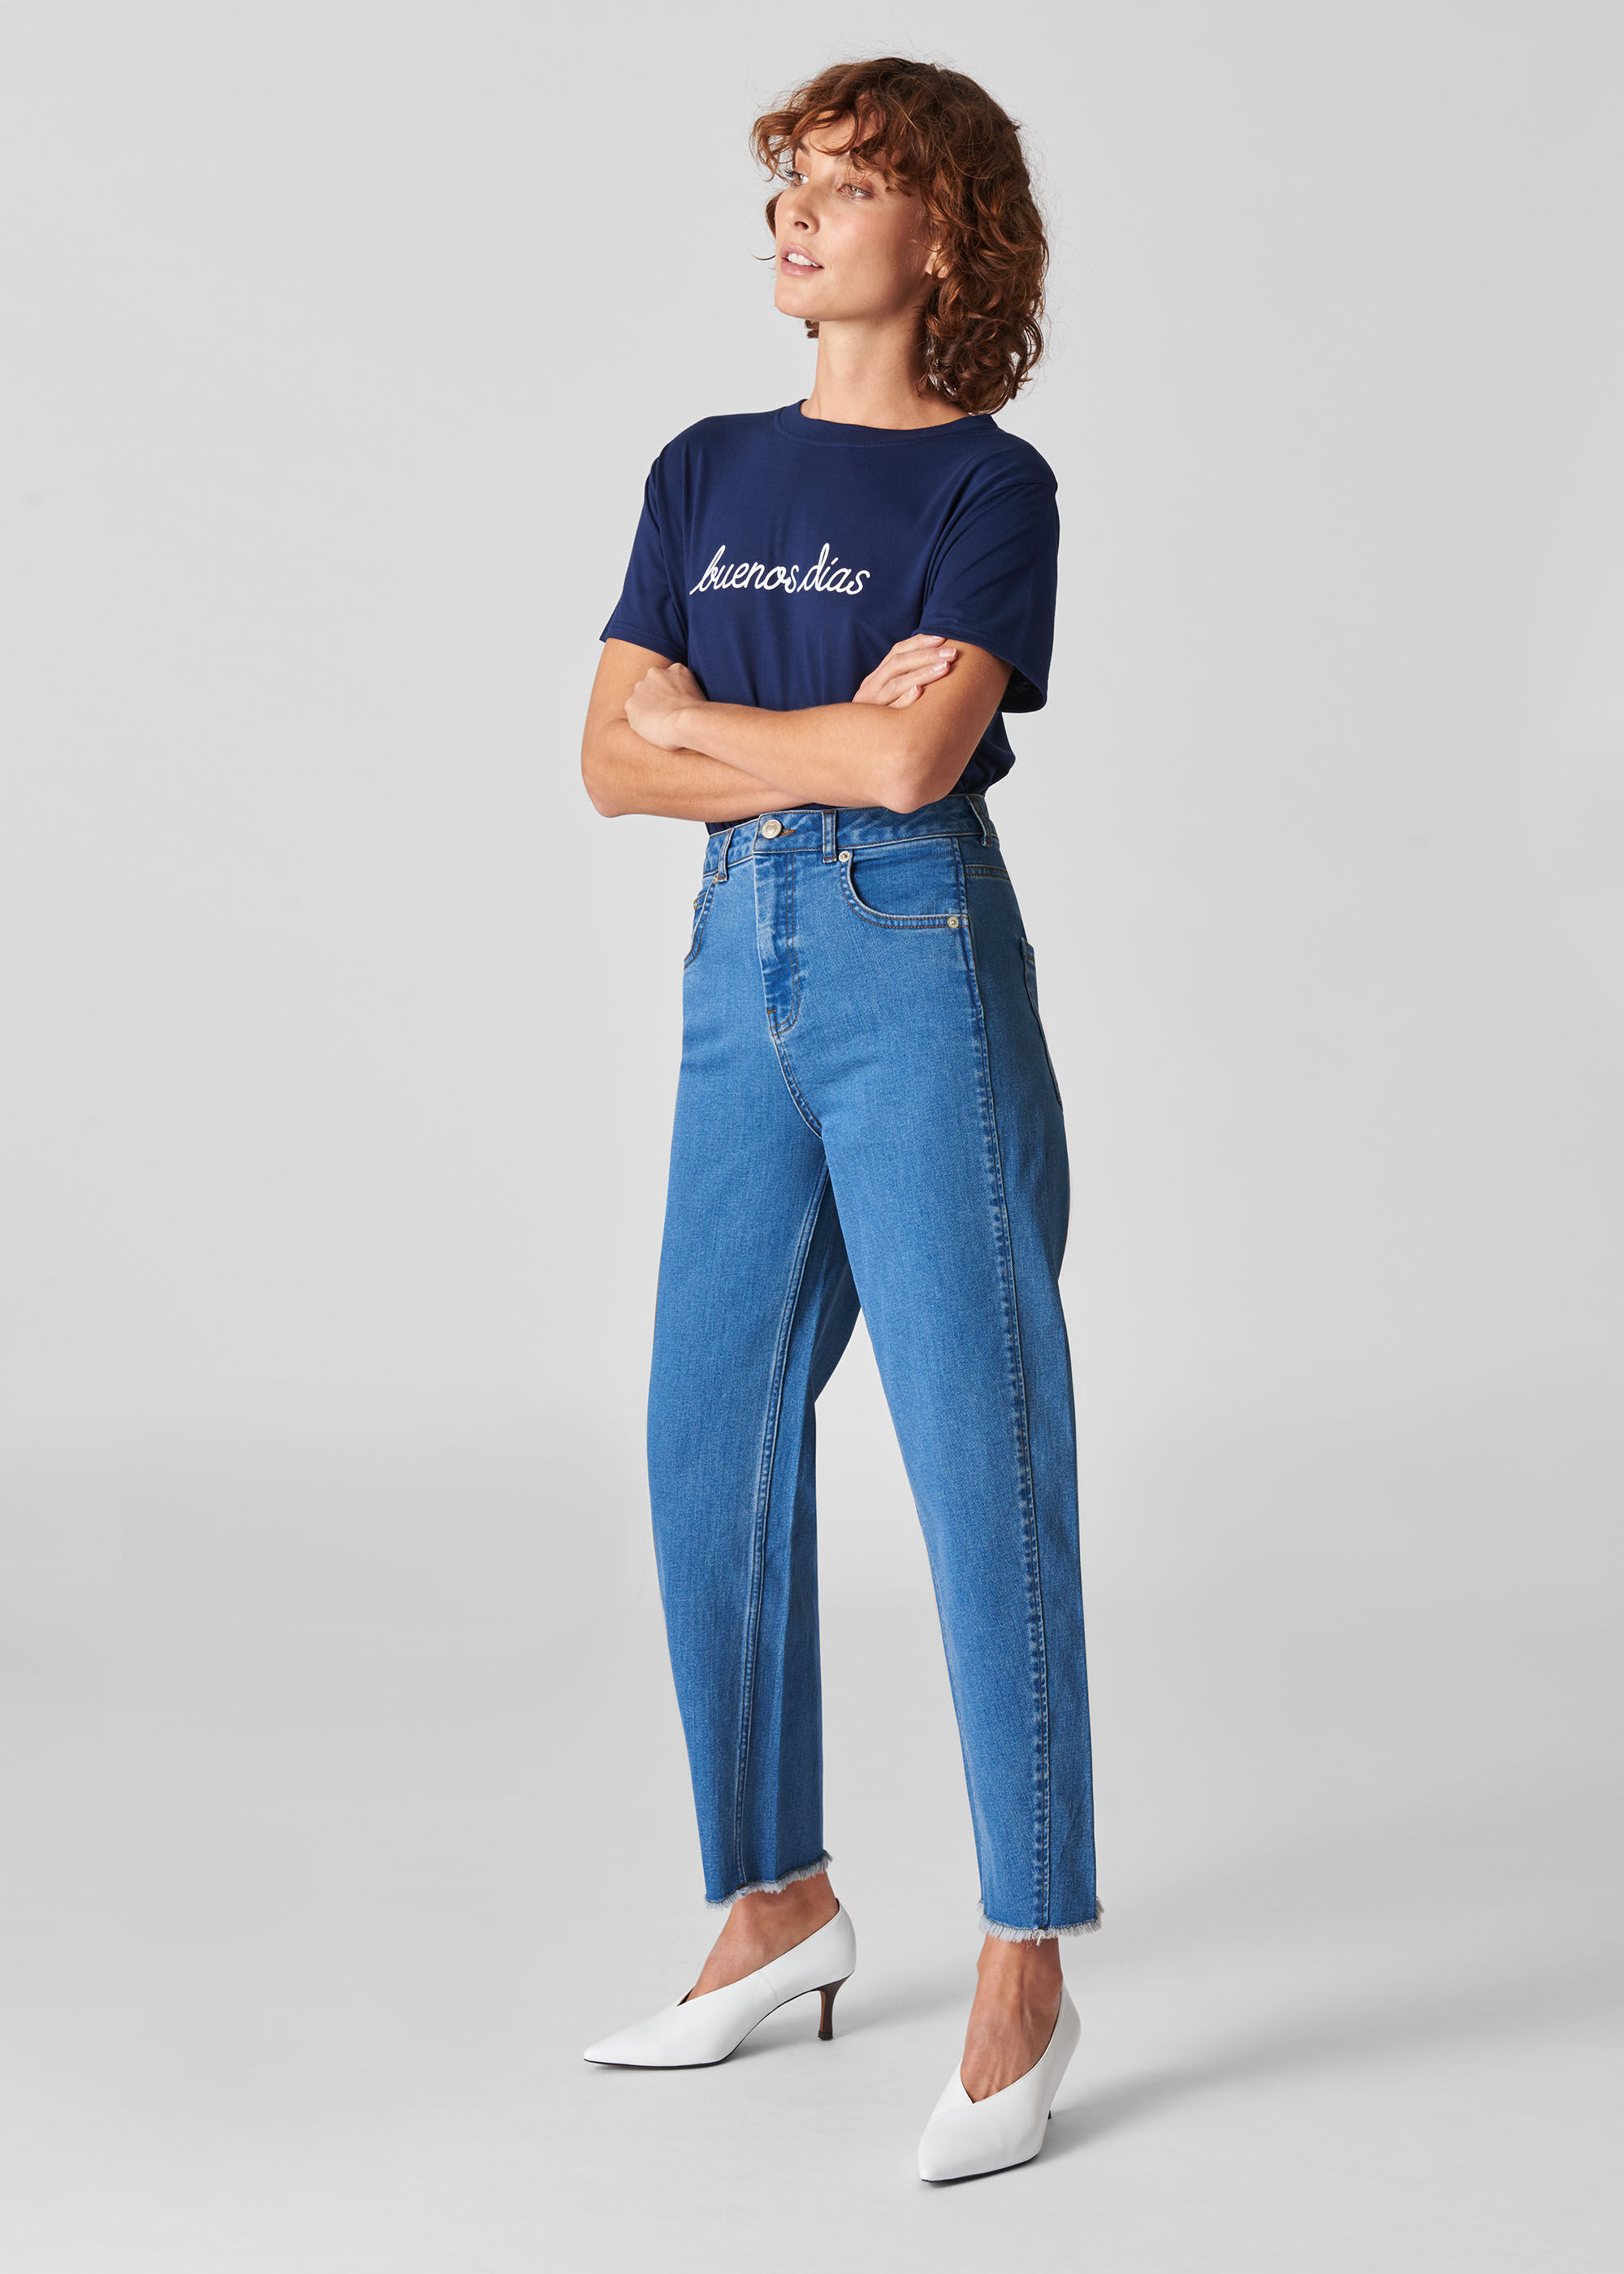 best jeans for spring 2019